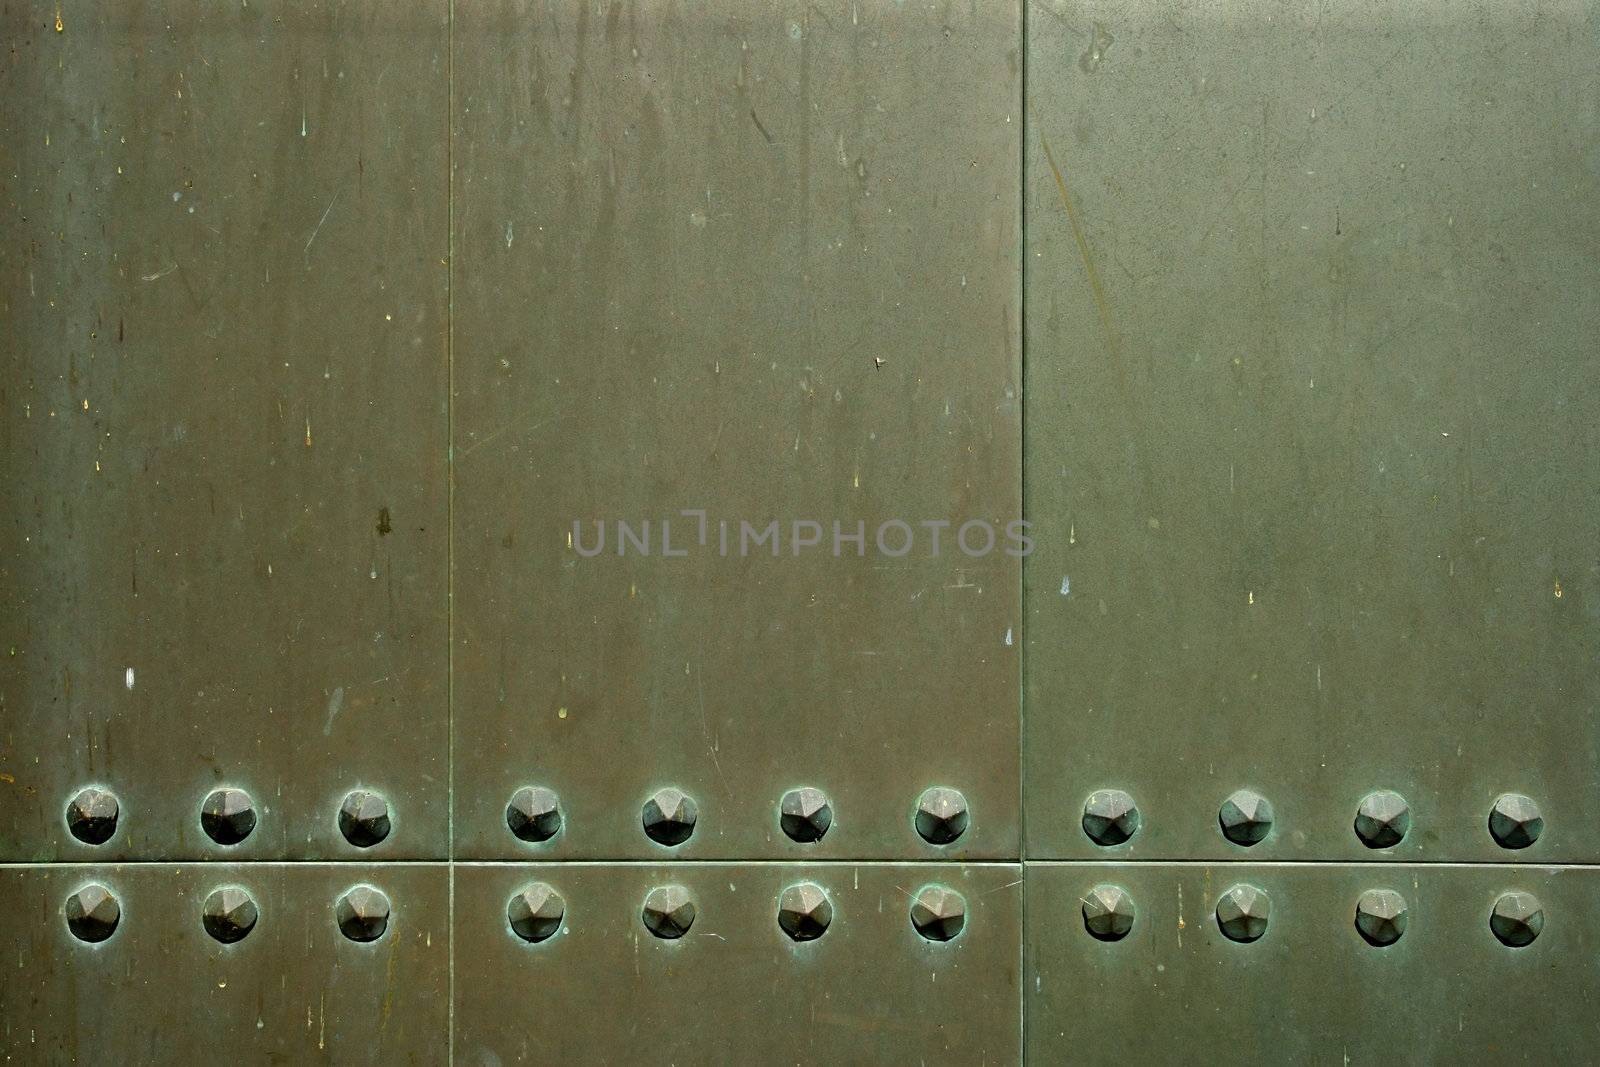 Background/industrial image of metal plates with old rivets.
